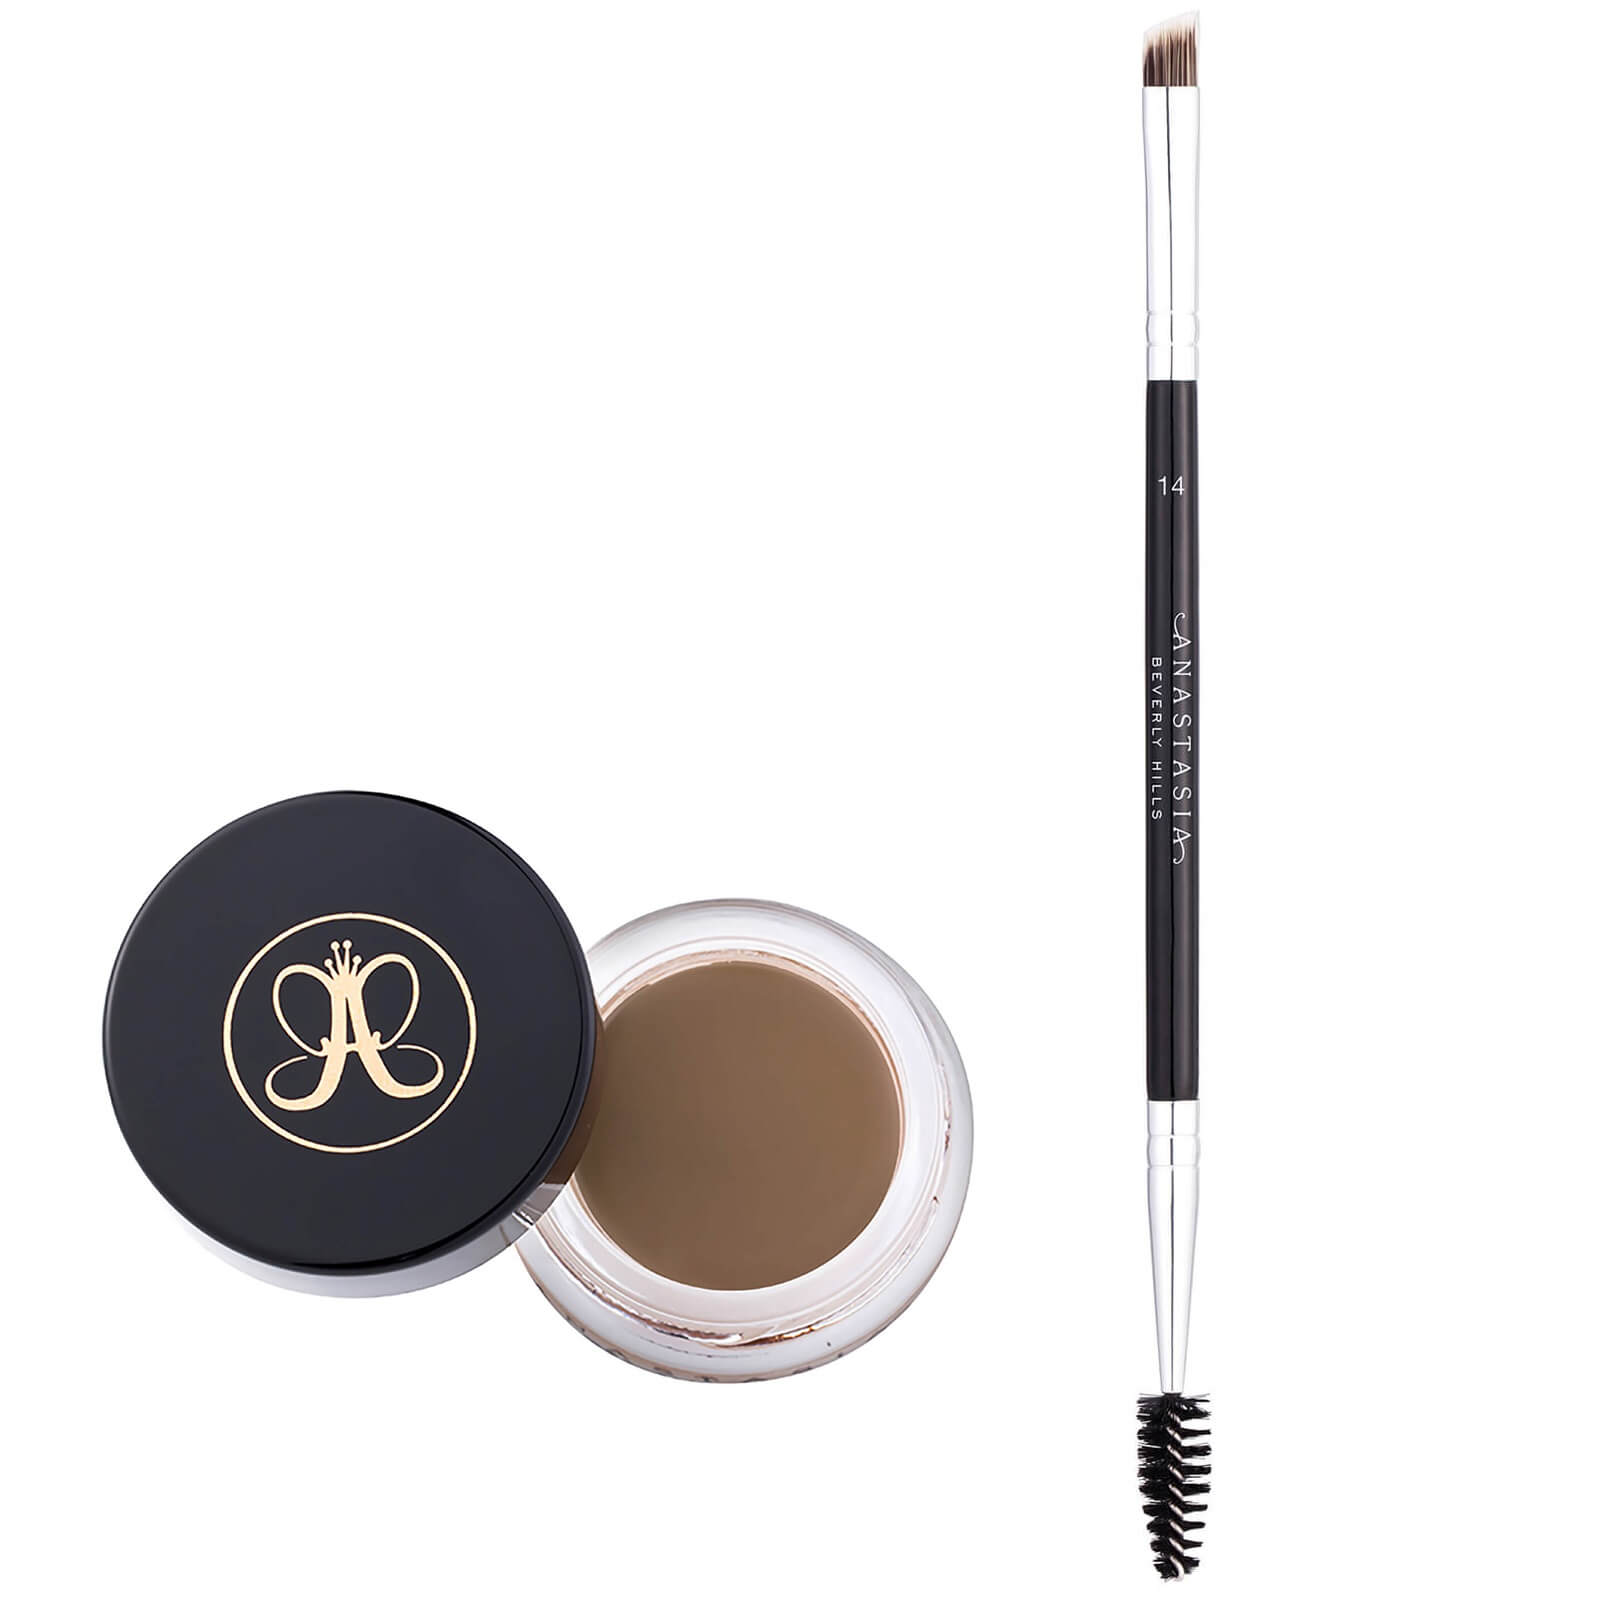 Anastasia Beverly Hills Bold Brow Duo (Various Shades) - Blonde